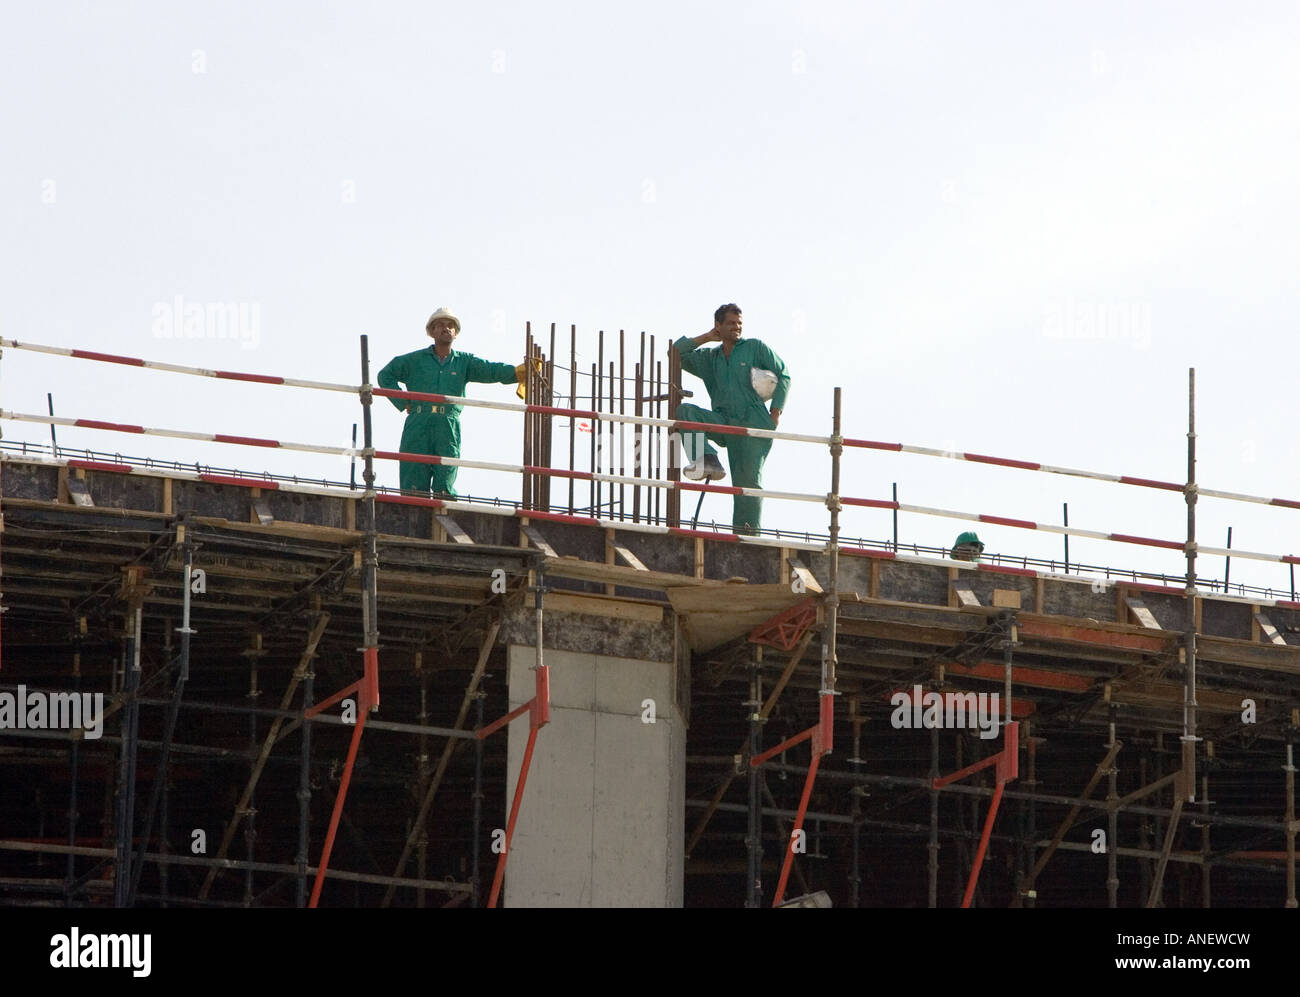 Indian construction workers on a building site in Dubai, UAE. Stock Photo